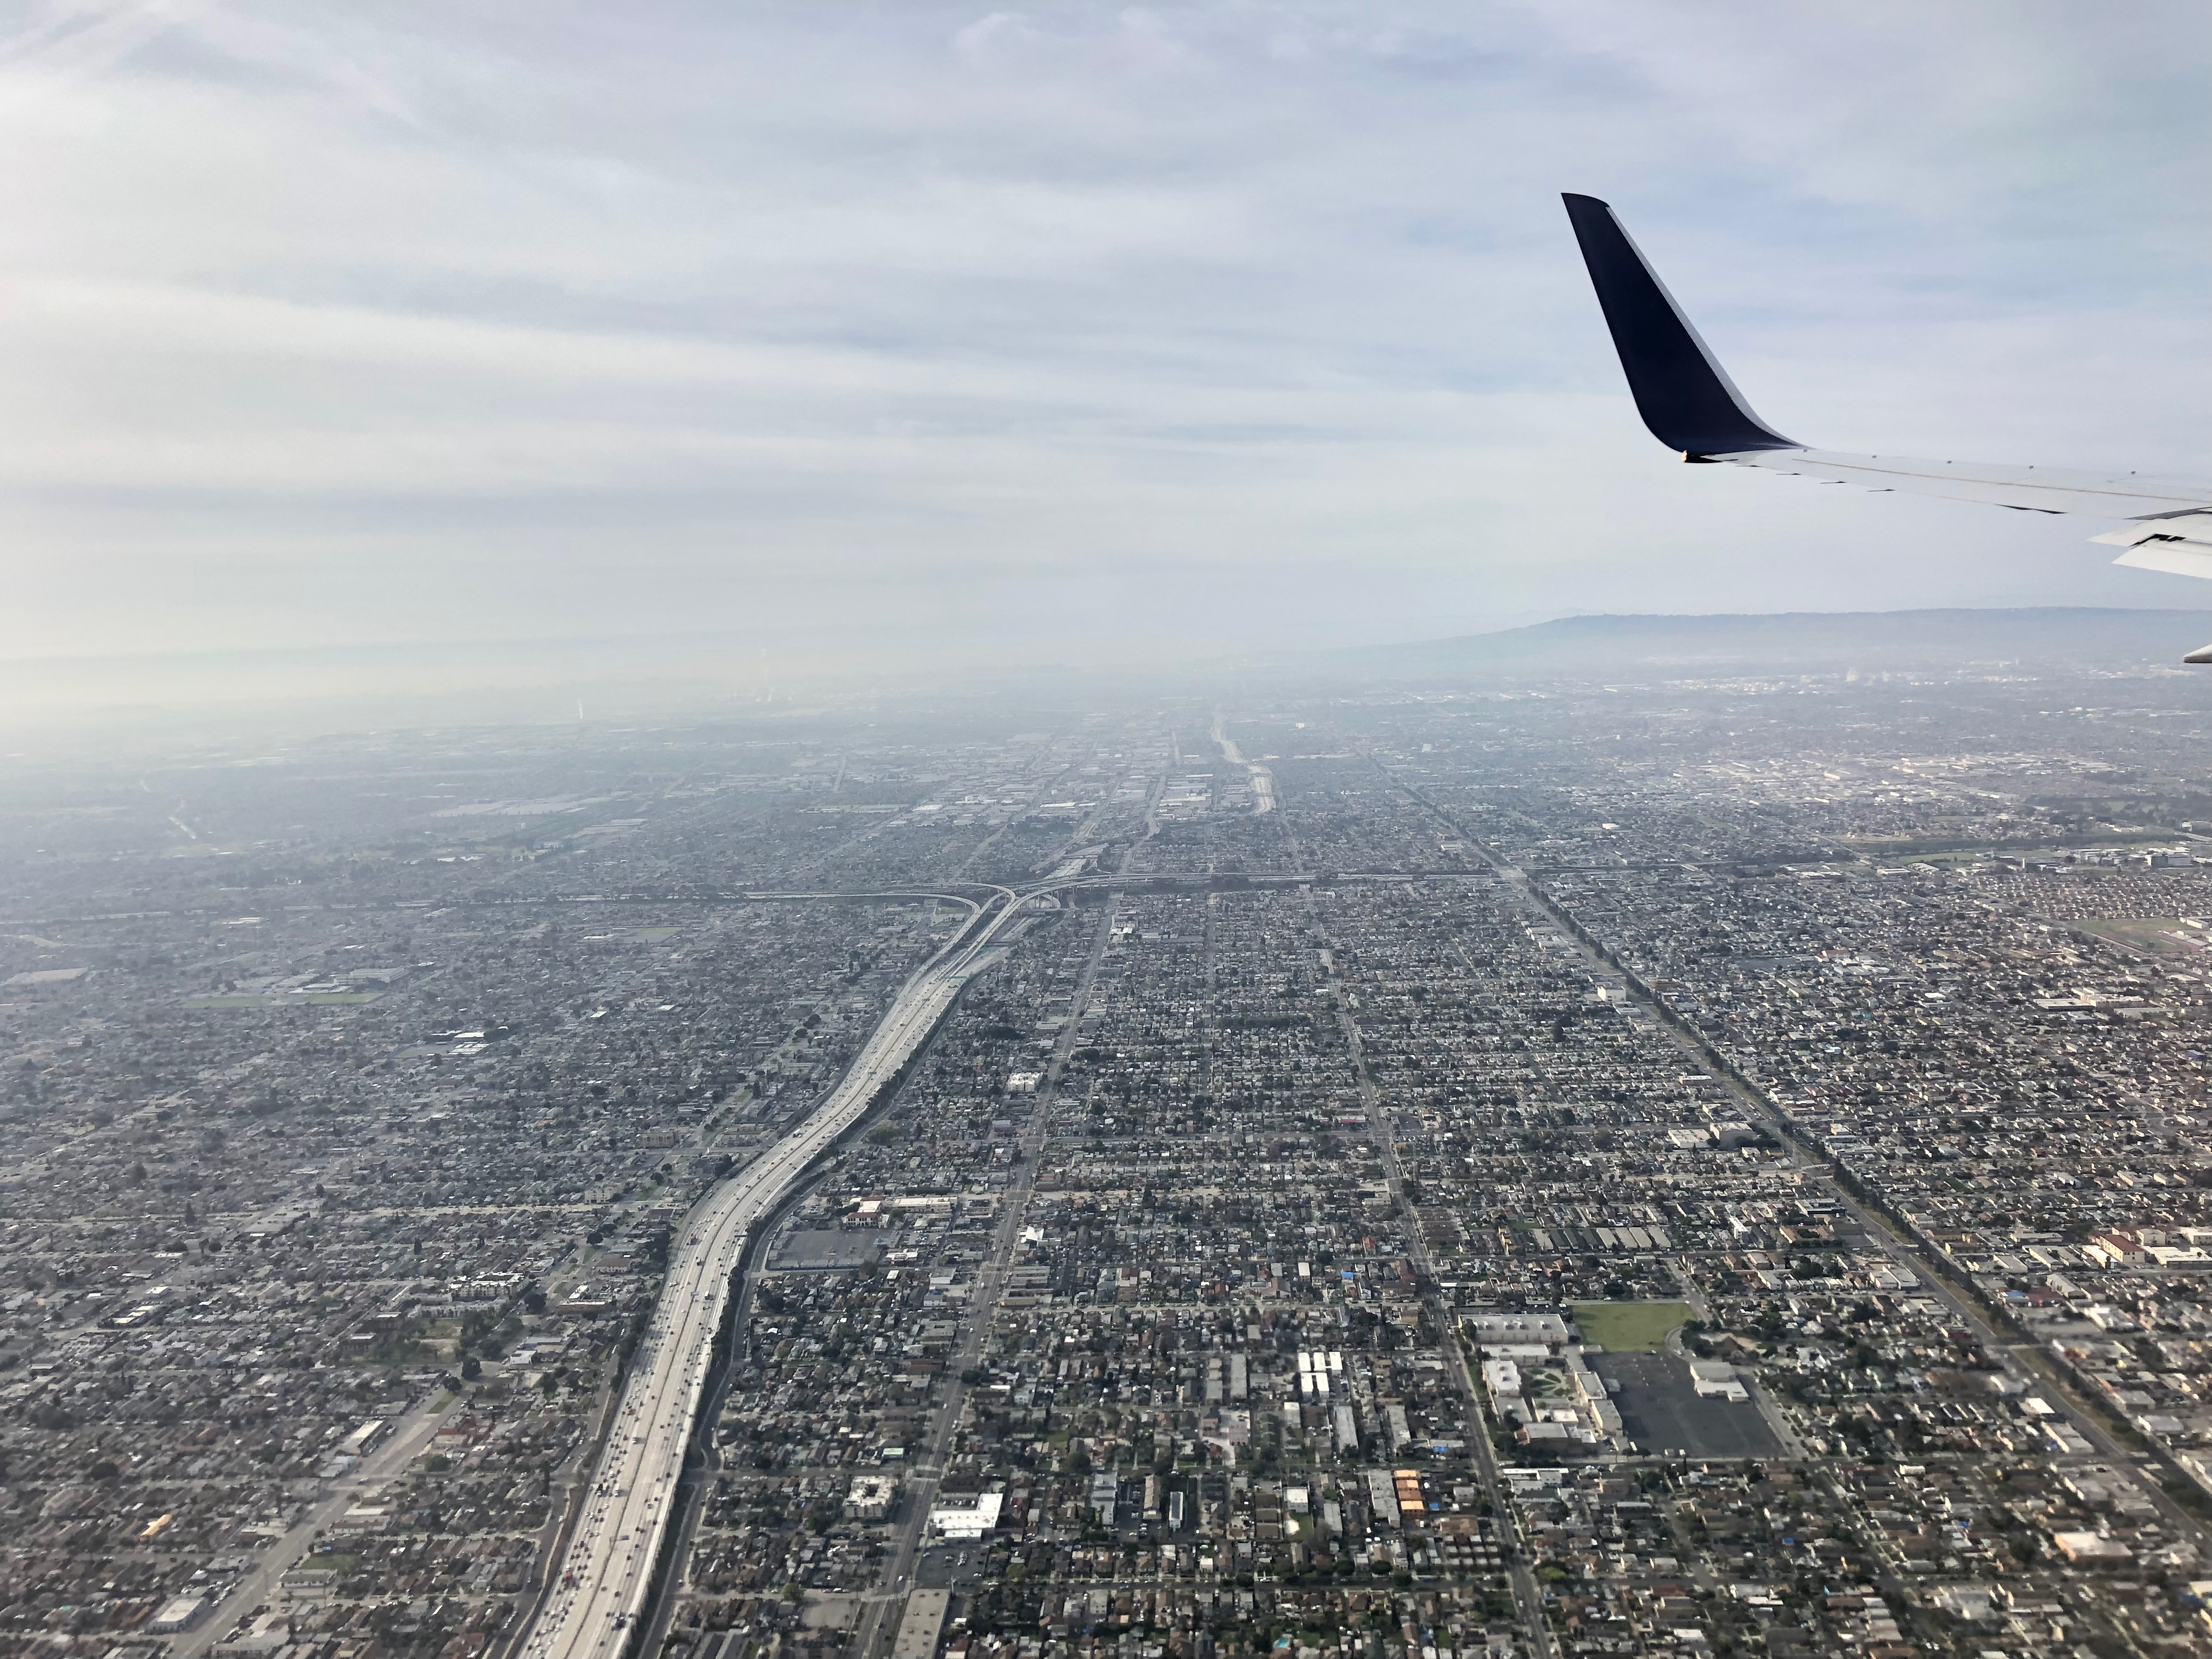 View of Los Angeles from the air train